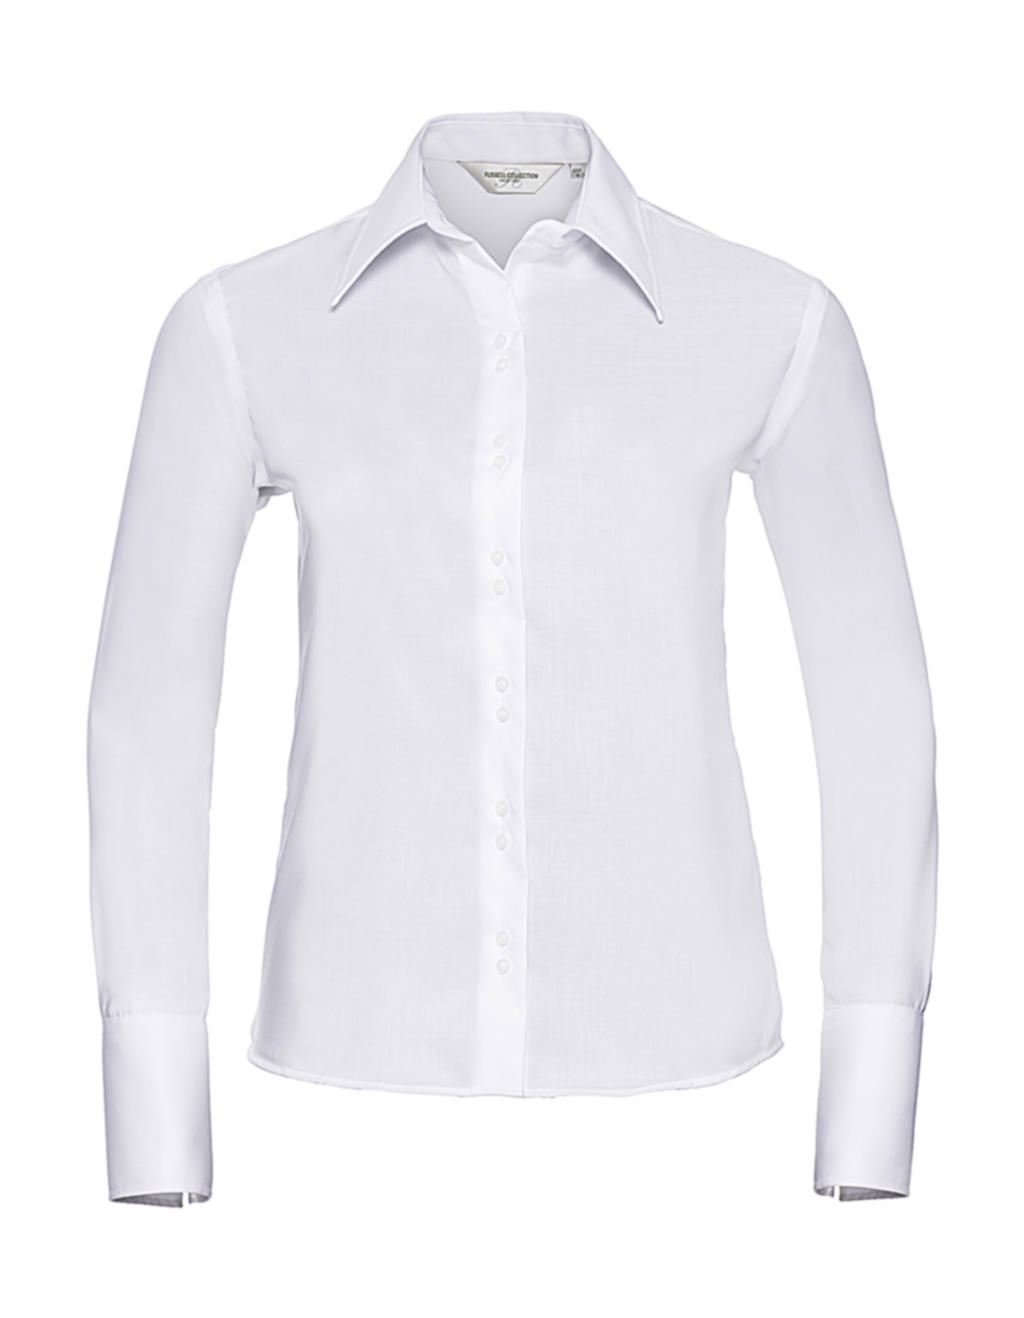  Ladies Ultimate Non-iron Shirt LS in Farbe White